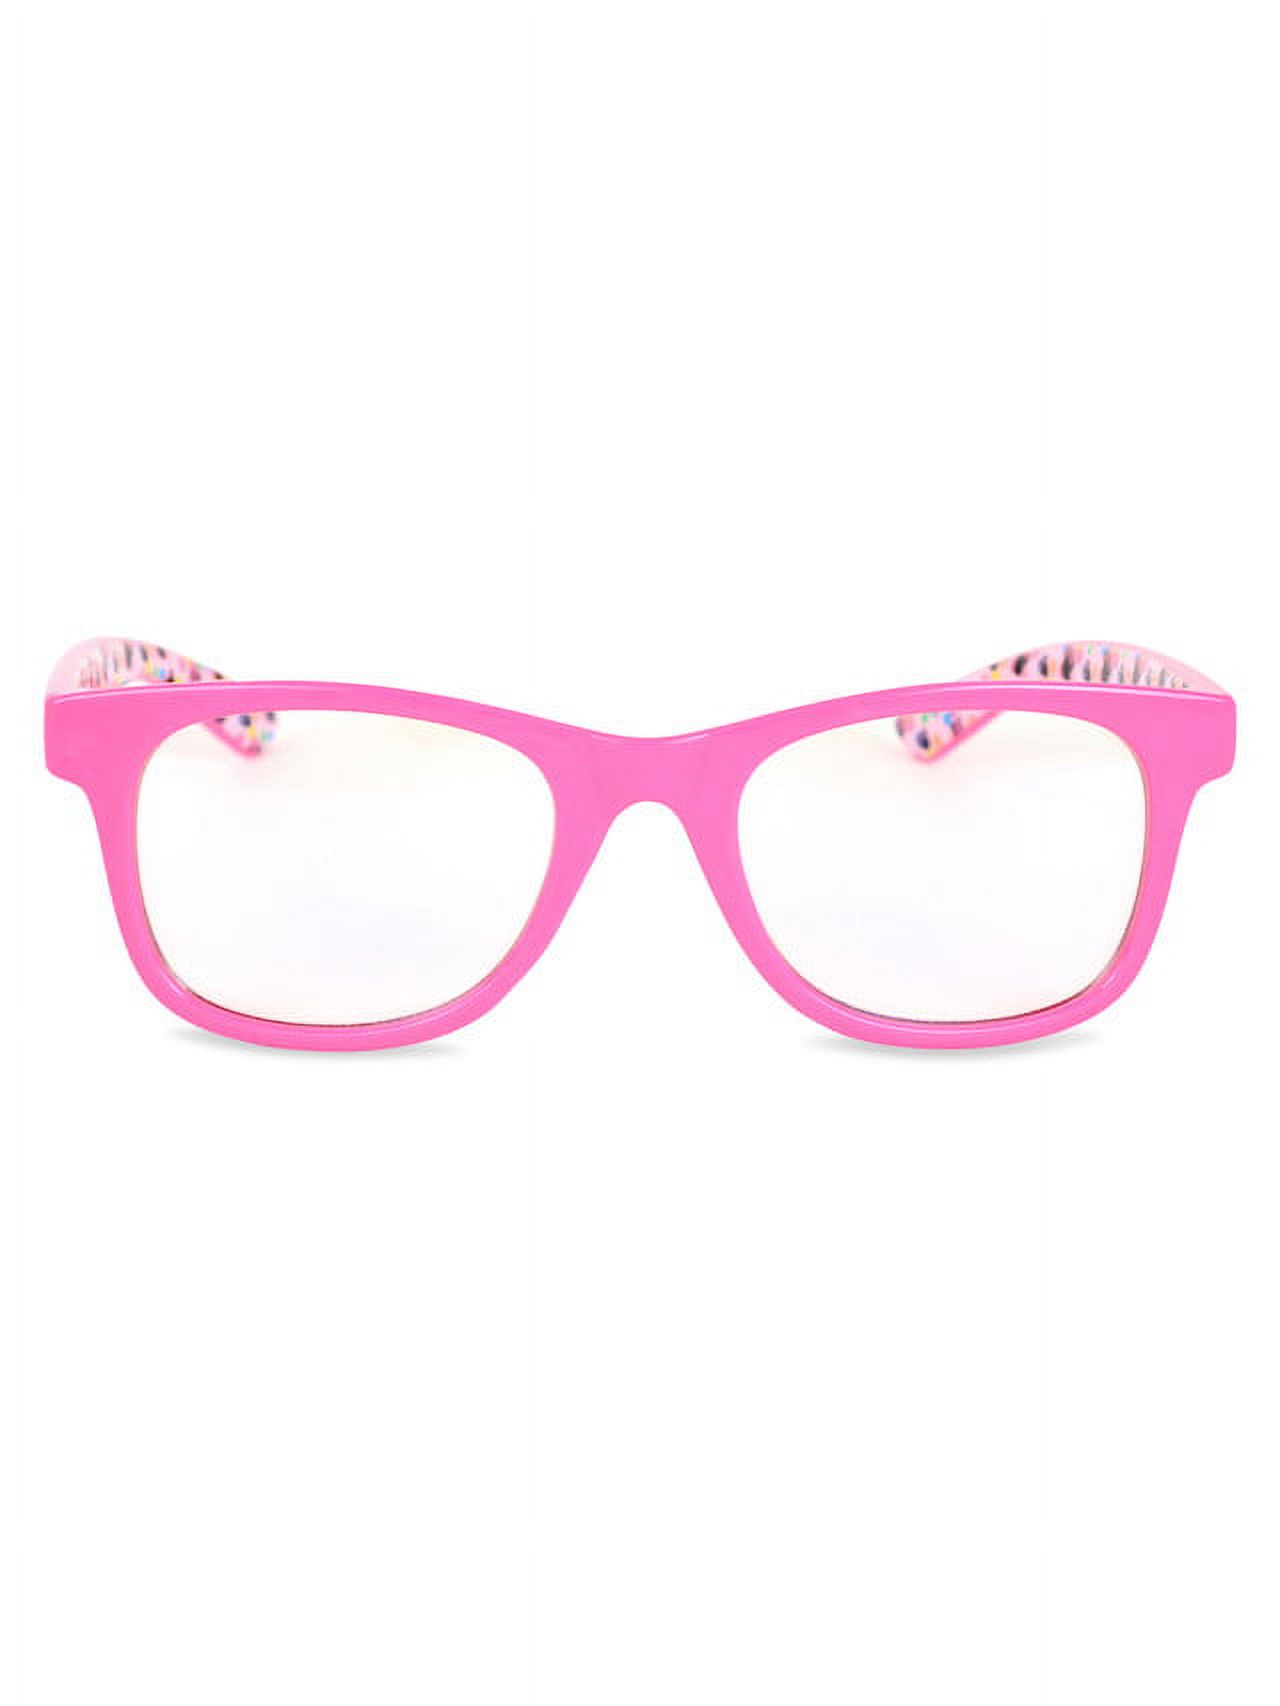 Minnie Mouse Blue Light Blocking Glasses for Boys with Zippered Case - image 4 of 5